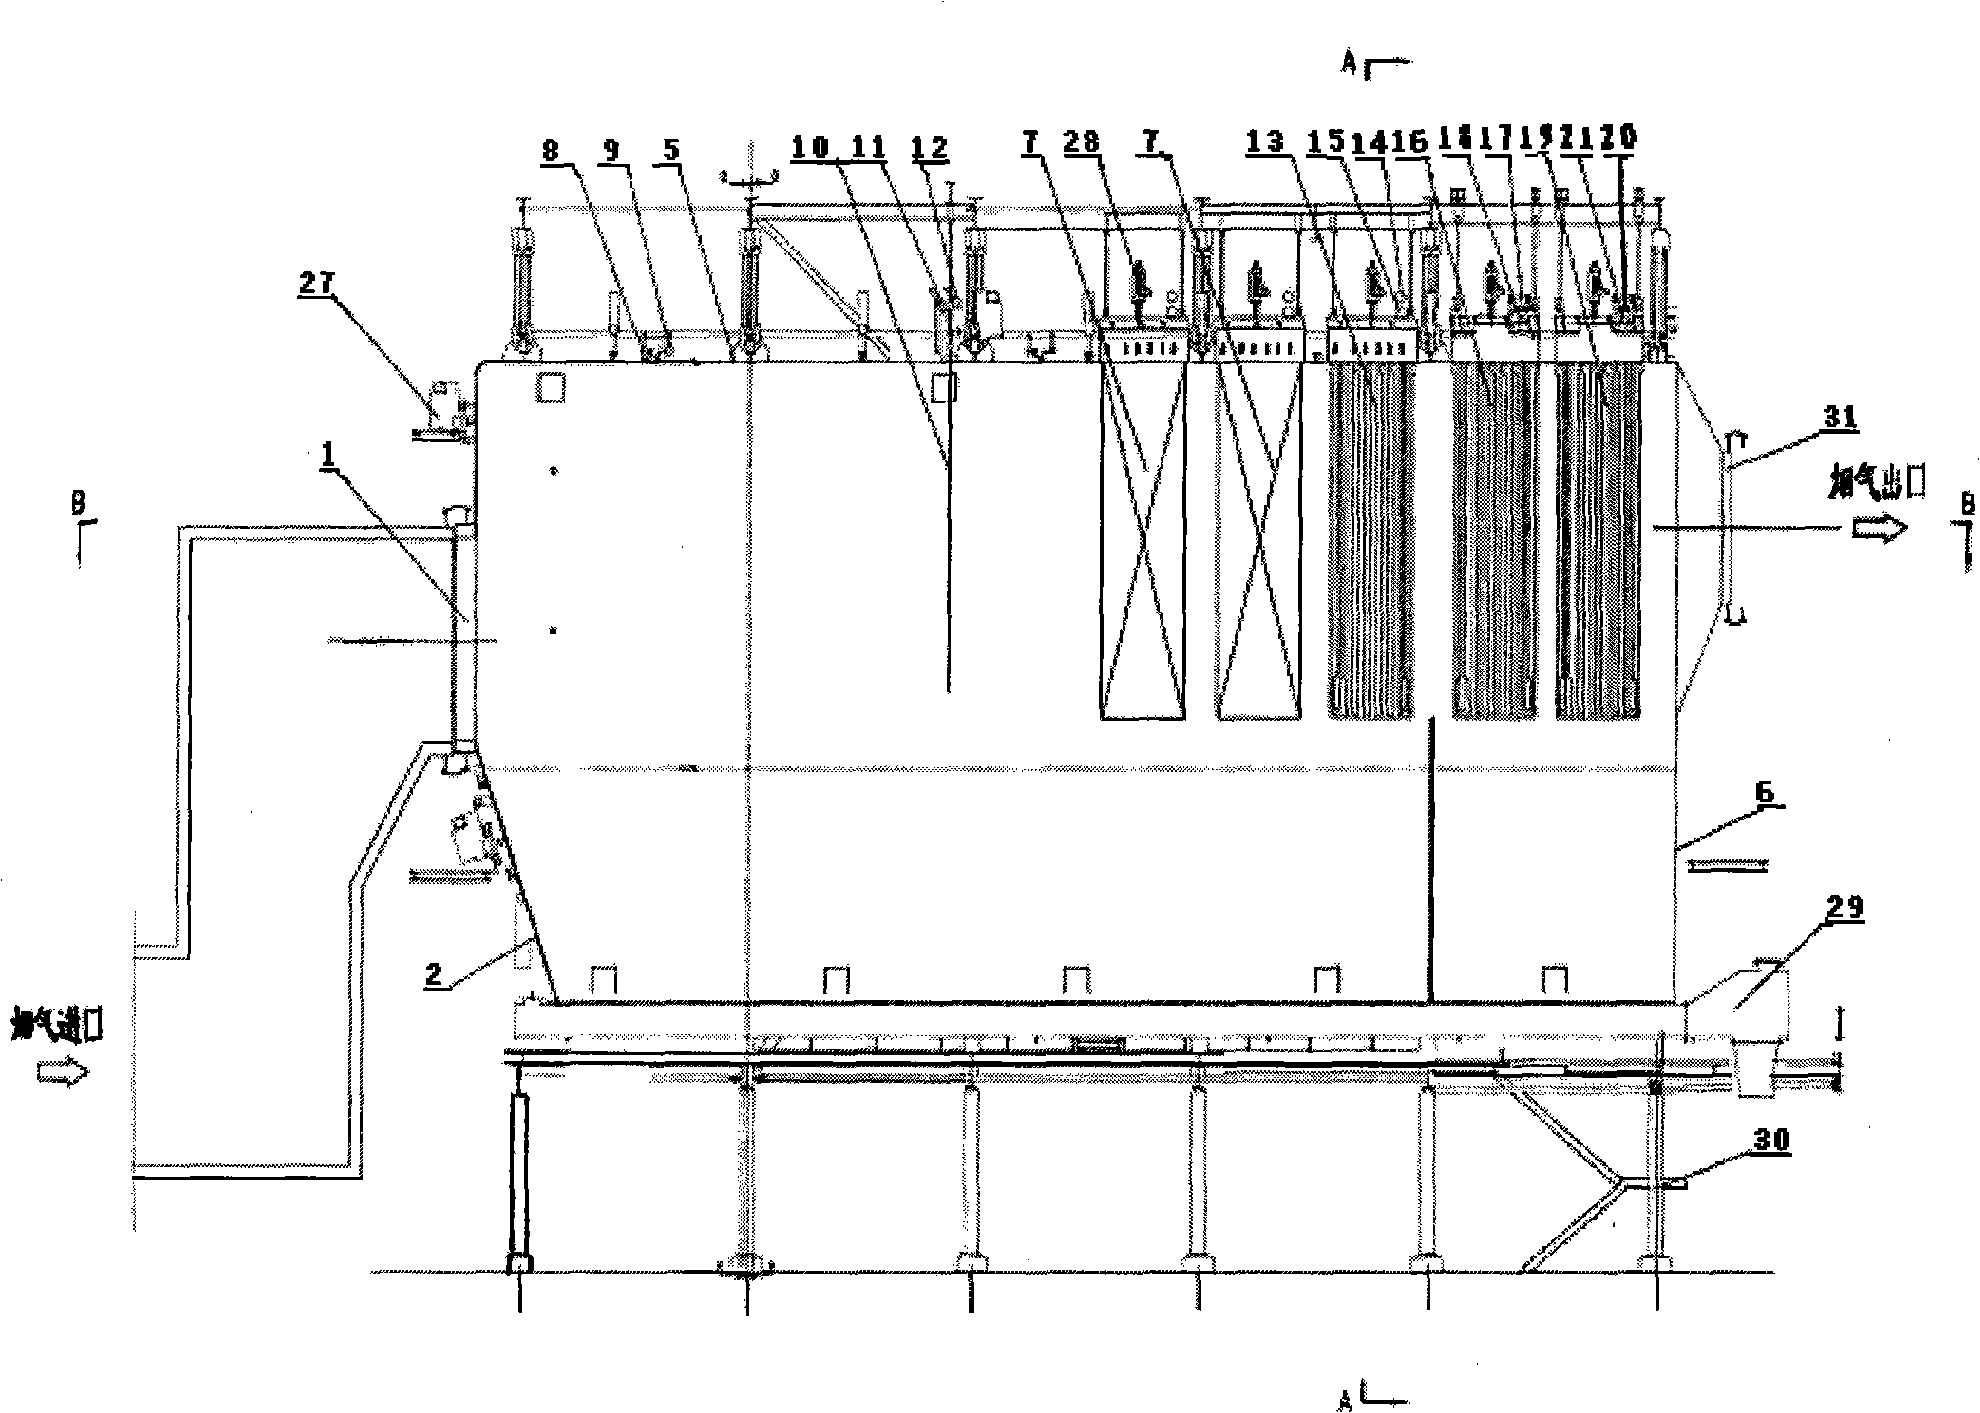 Horizontal type waste heat boiler of zinc-containing dust recovery system of rotary hearth furnace